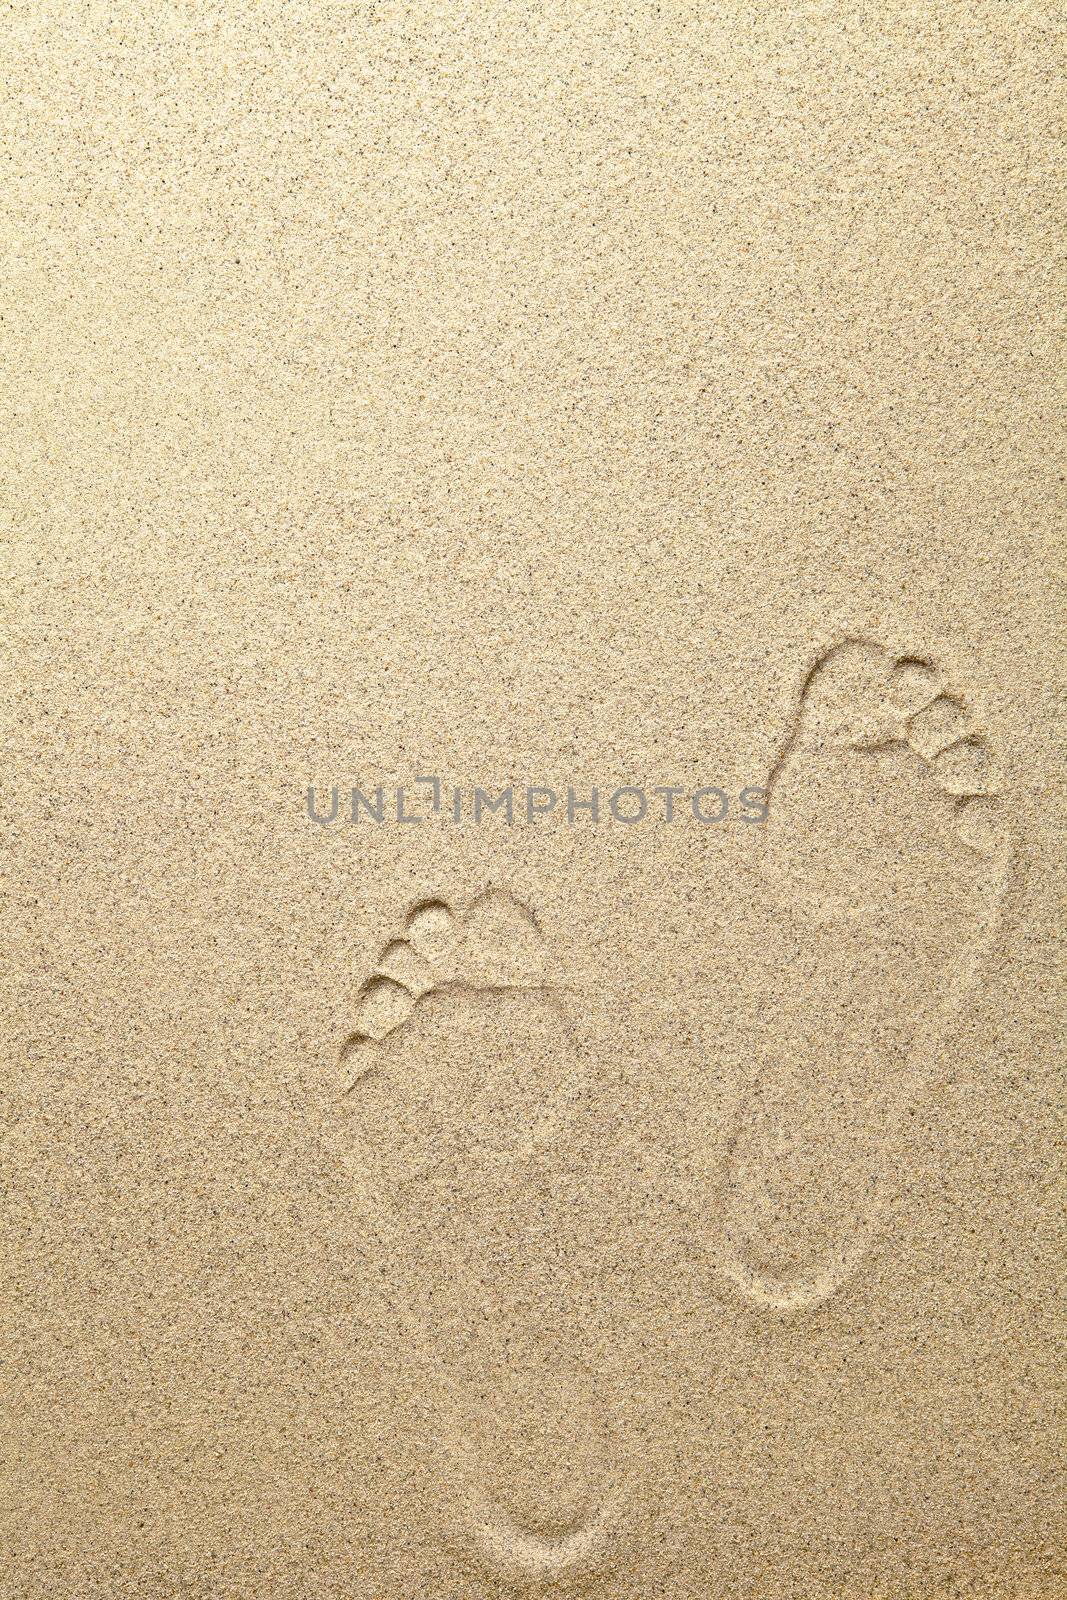 Sandy summer beach background with footprints. Copy space